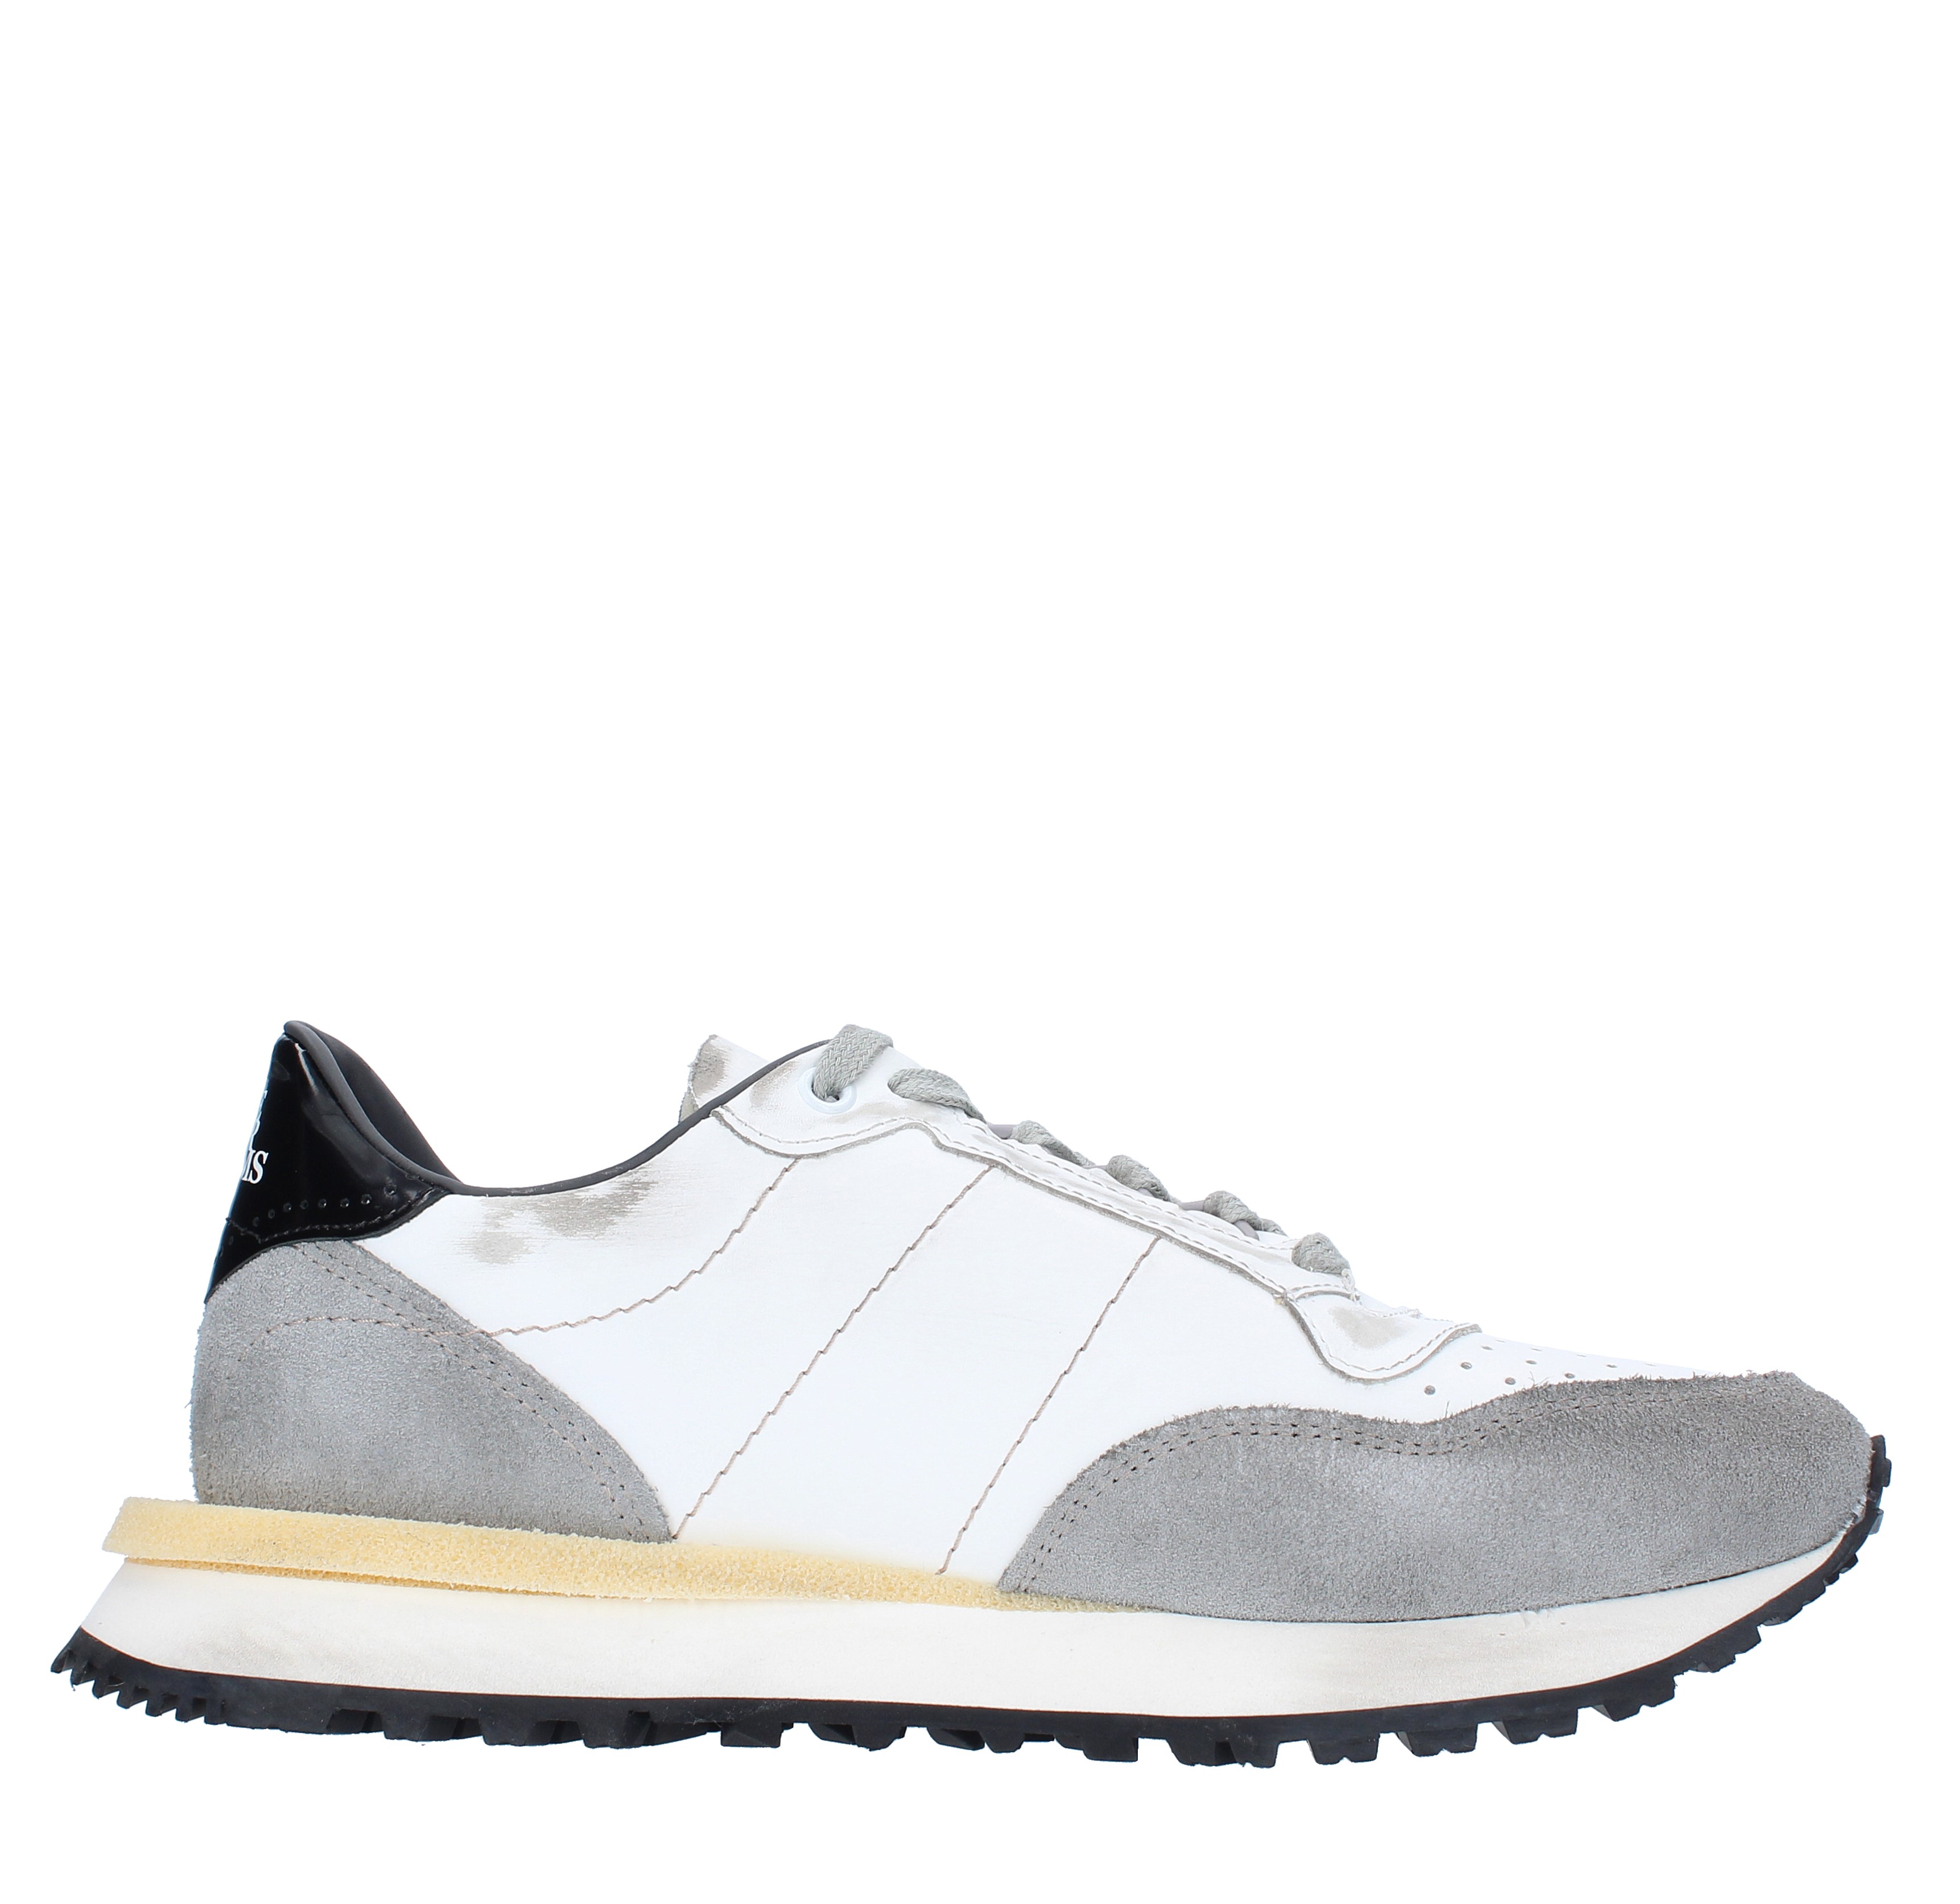 Trainers model HC2MS410 in leather and fabric HIDNANDER | HC2MS410 470BIANCO-GRIGIO